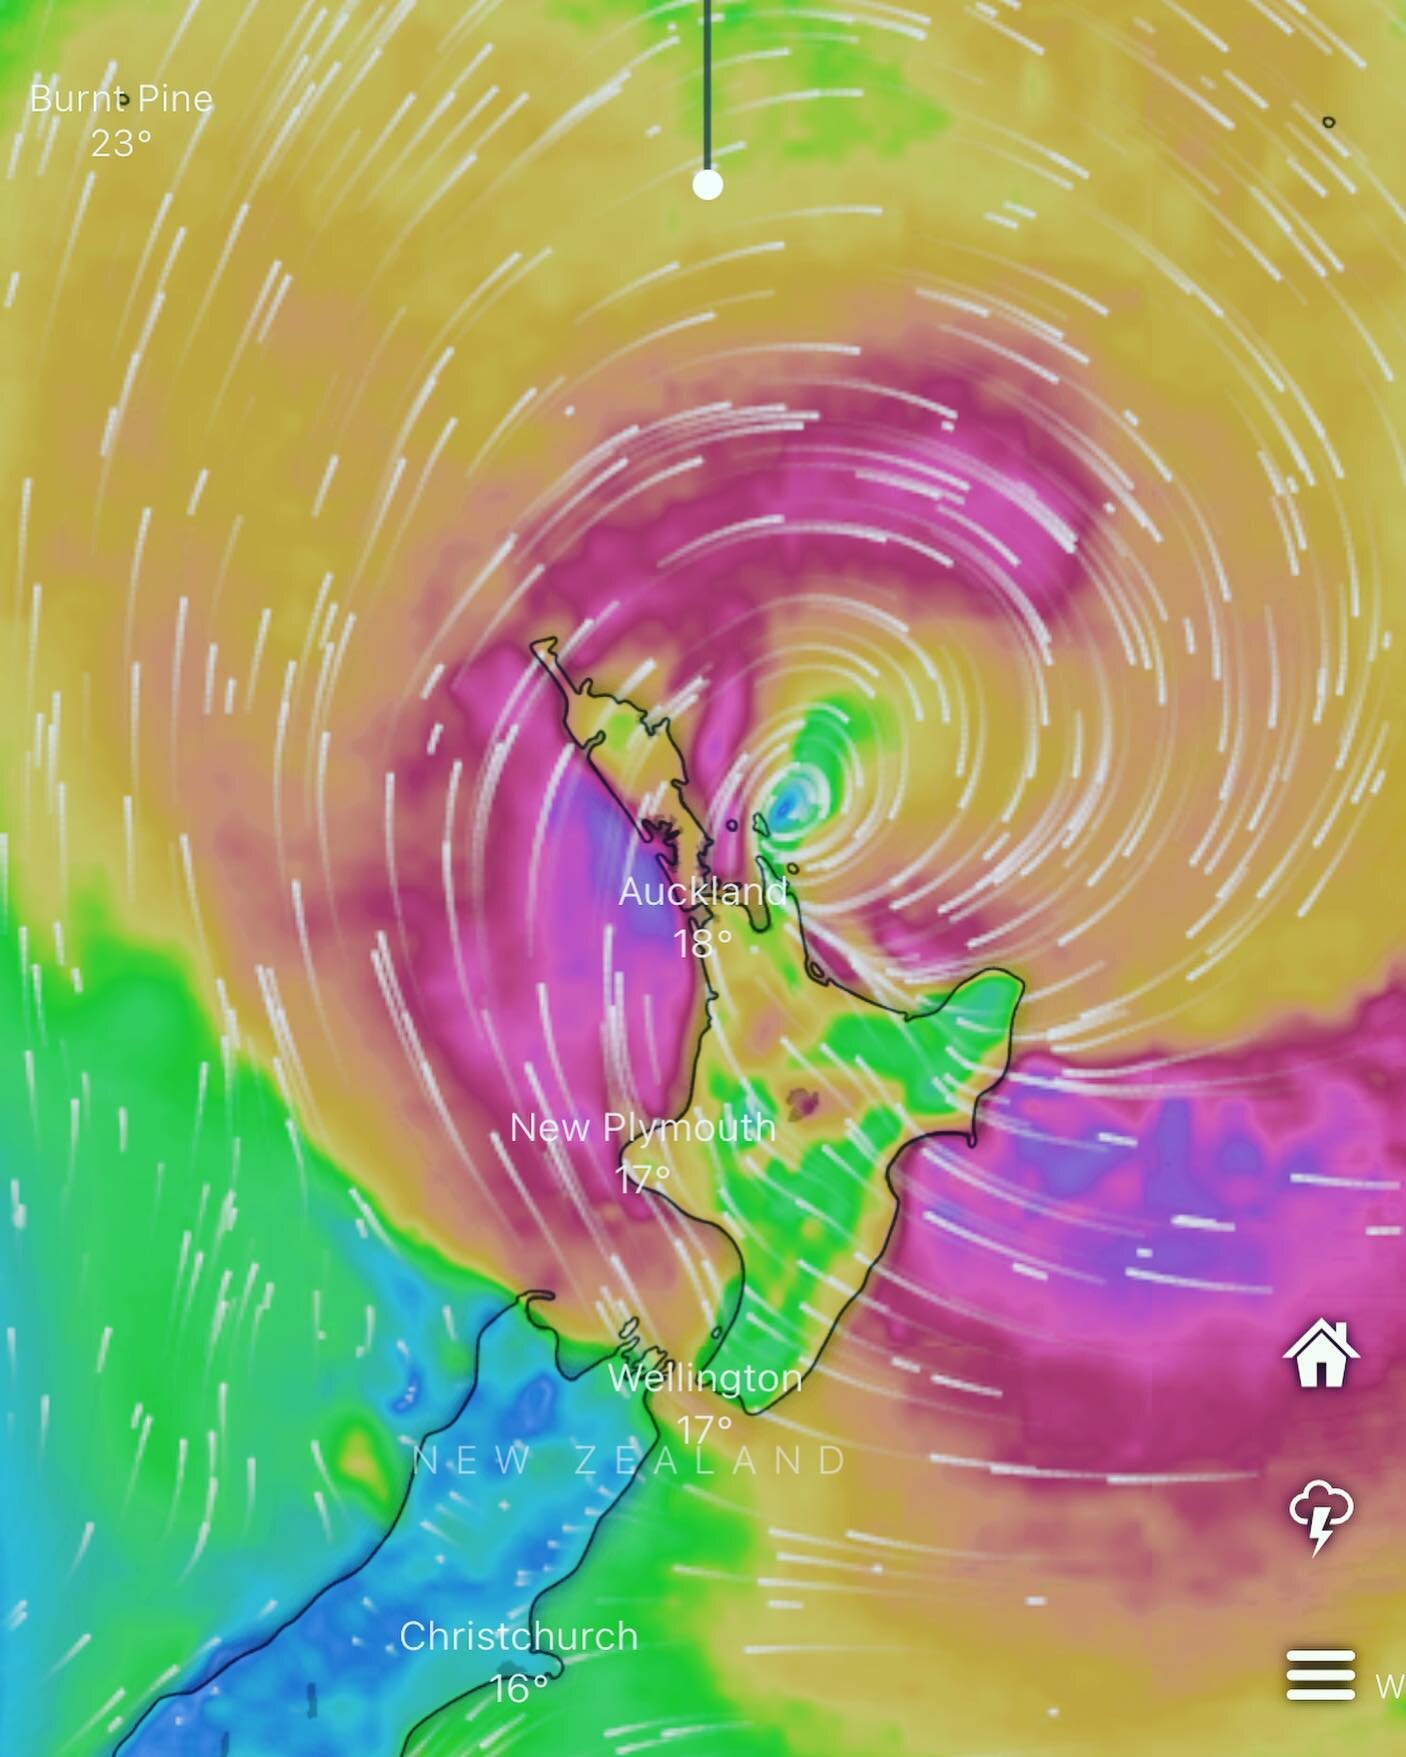 10.31 pm on the Windy app - we&rsquo;ve lost power - I&rsquo;ve just turned the generator off for the night - it will be an interesting night ahead - God bless guys